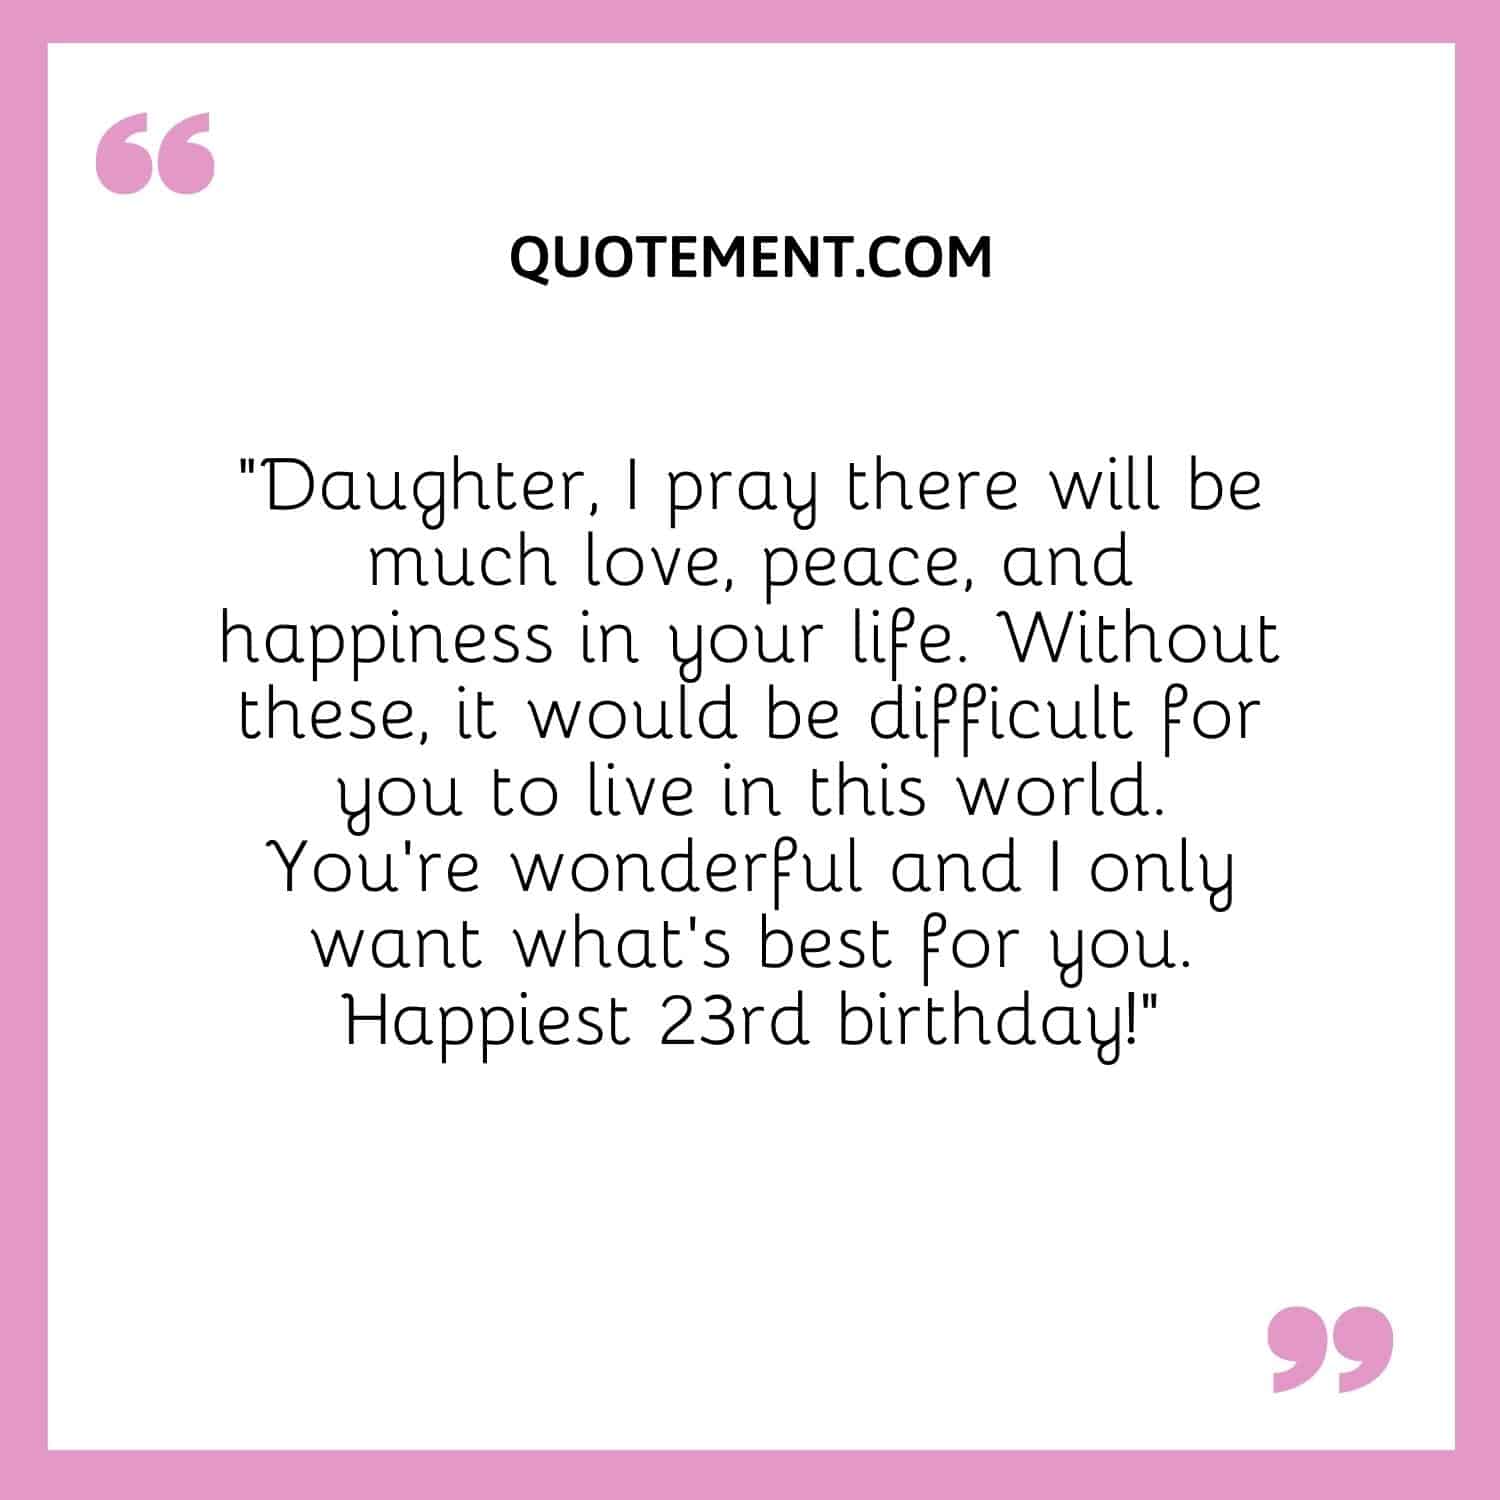 Daughter, I pray there will be much love, peace, and happiness in your life